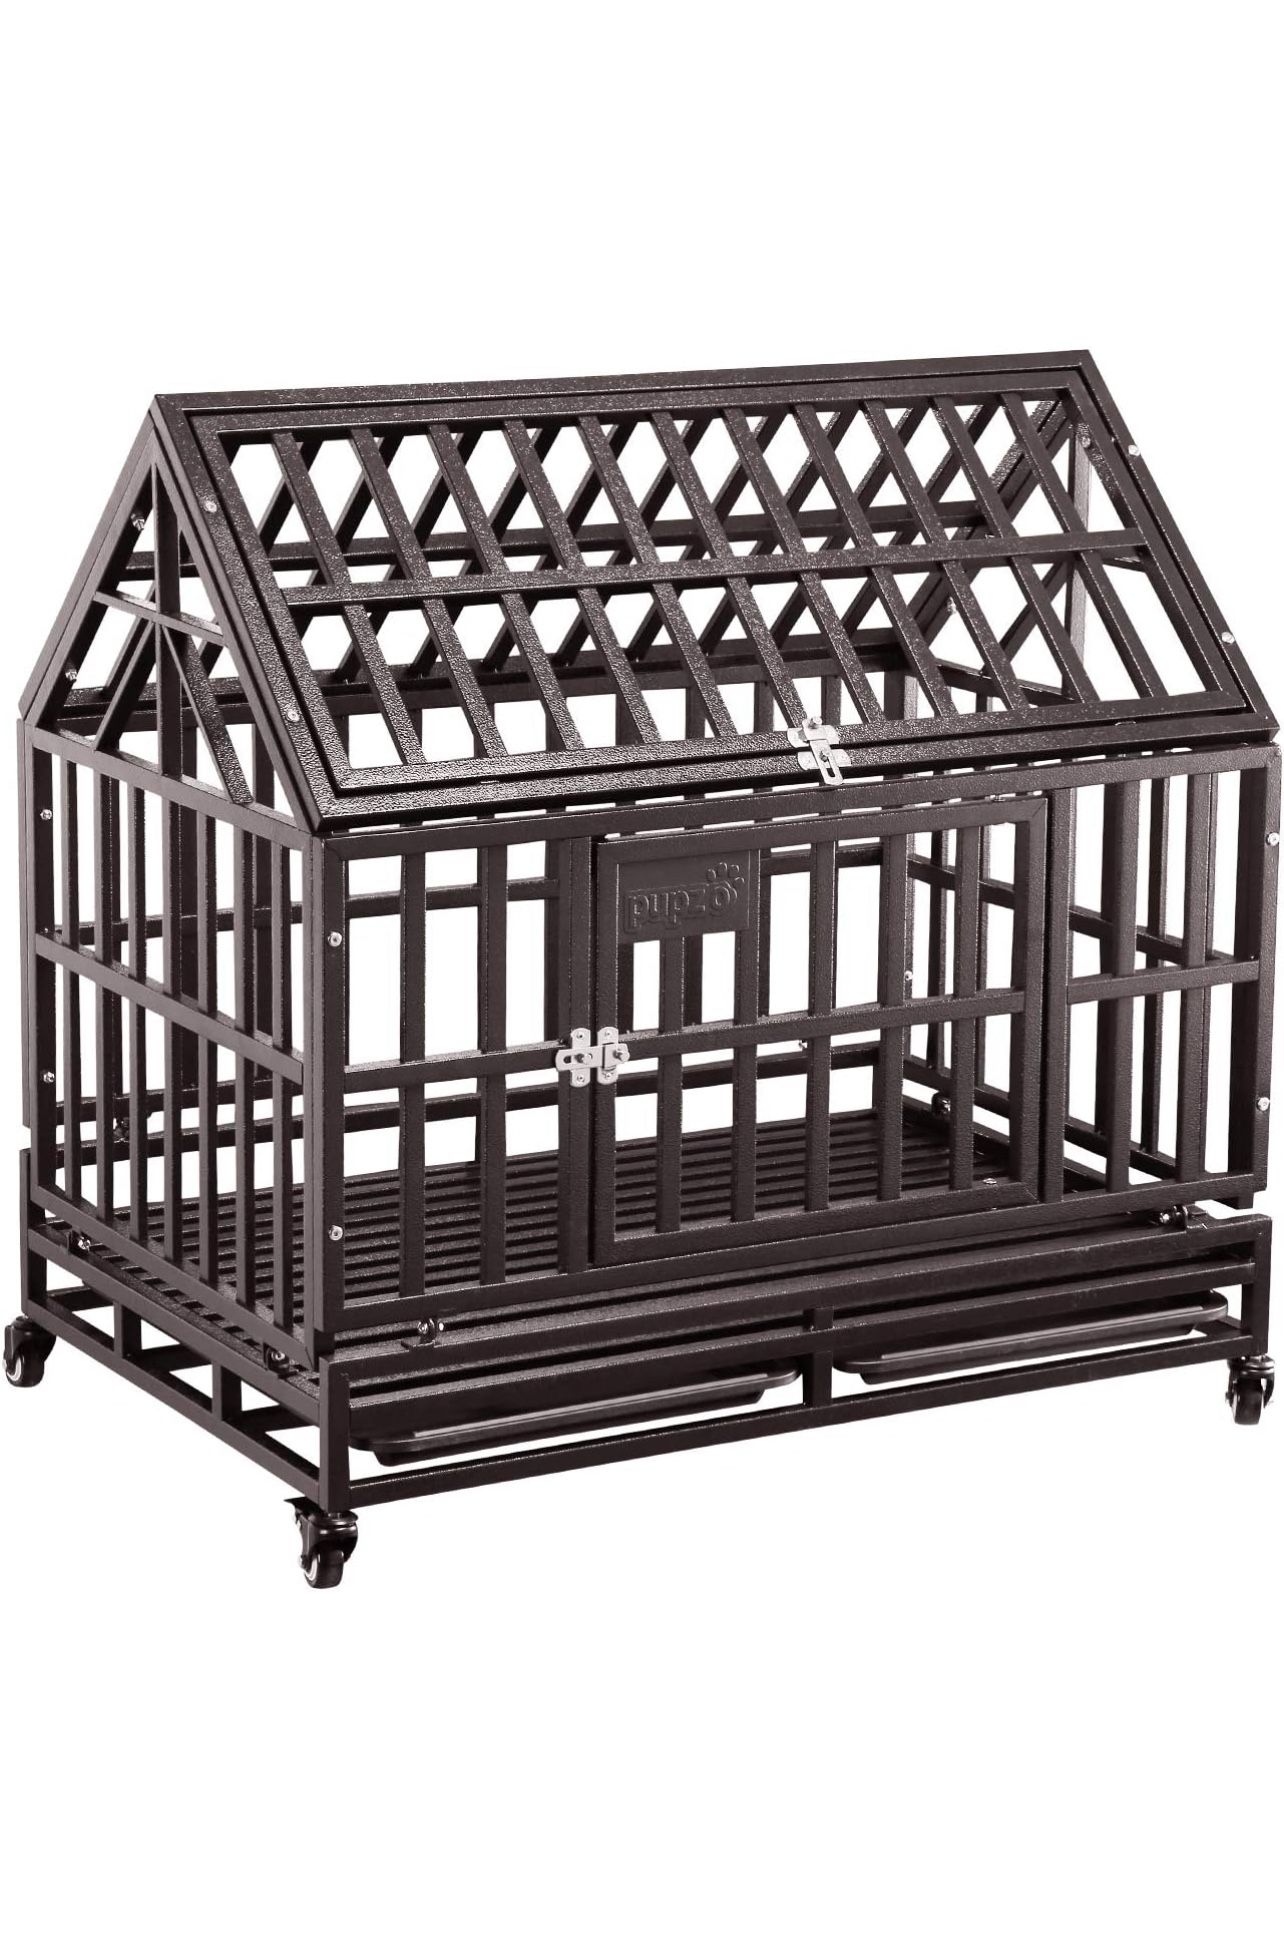  Dog Cage Crate Kennel